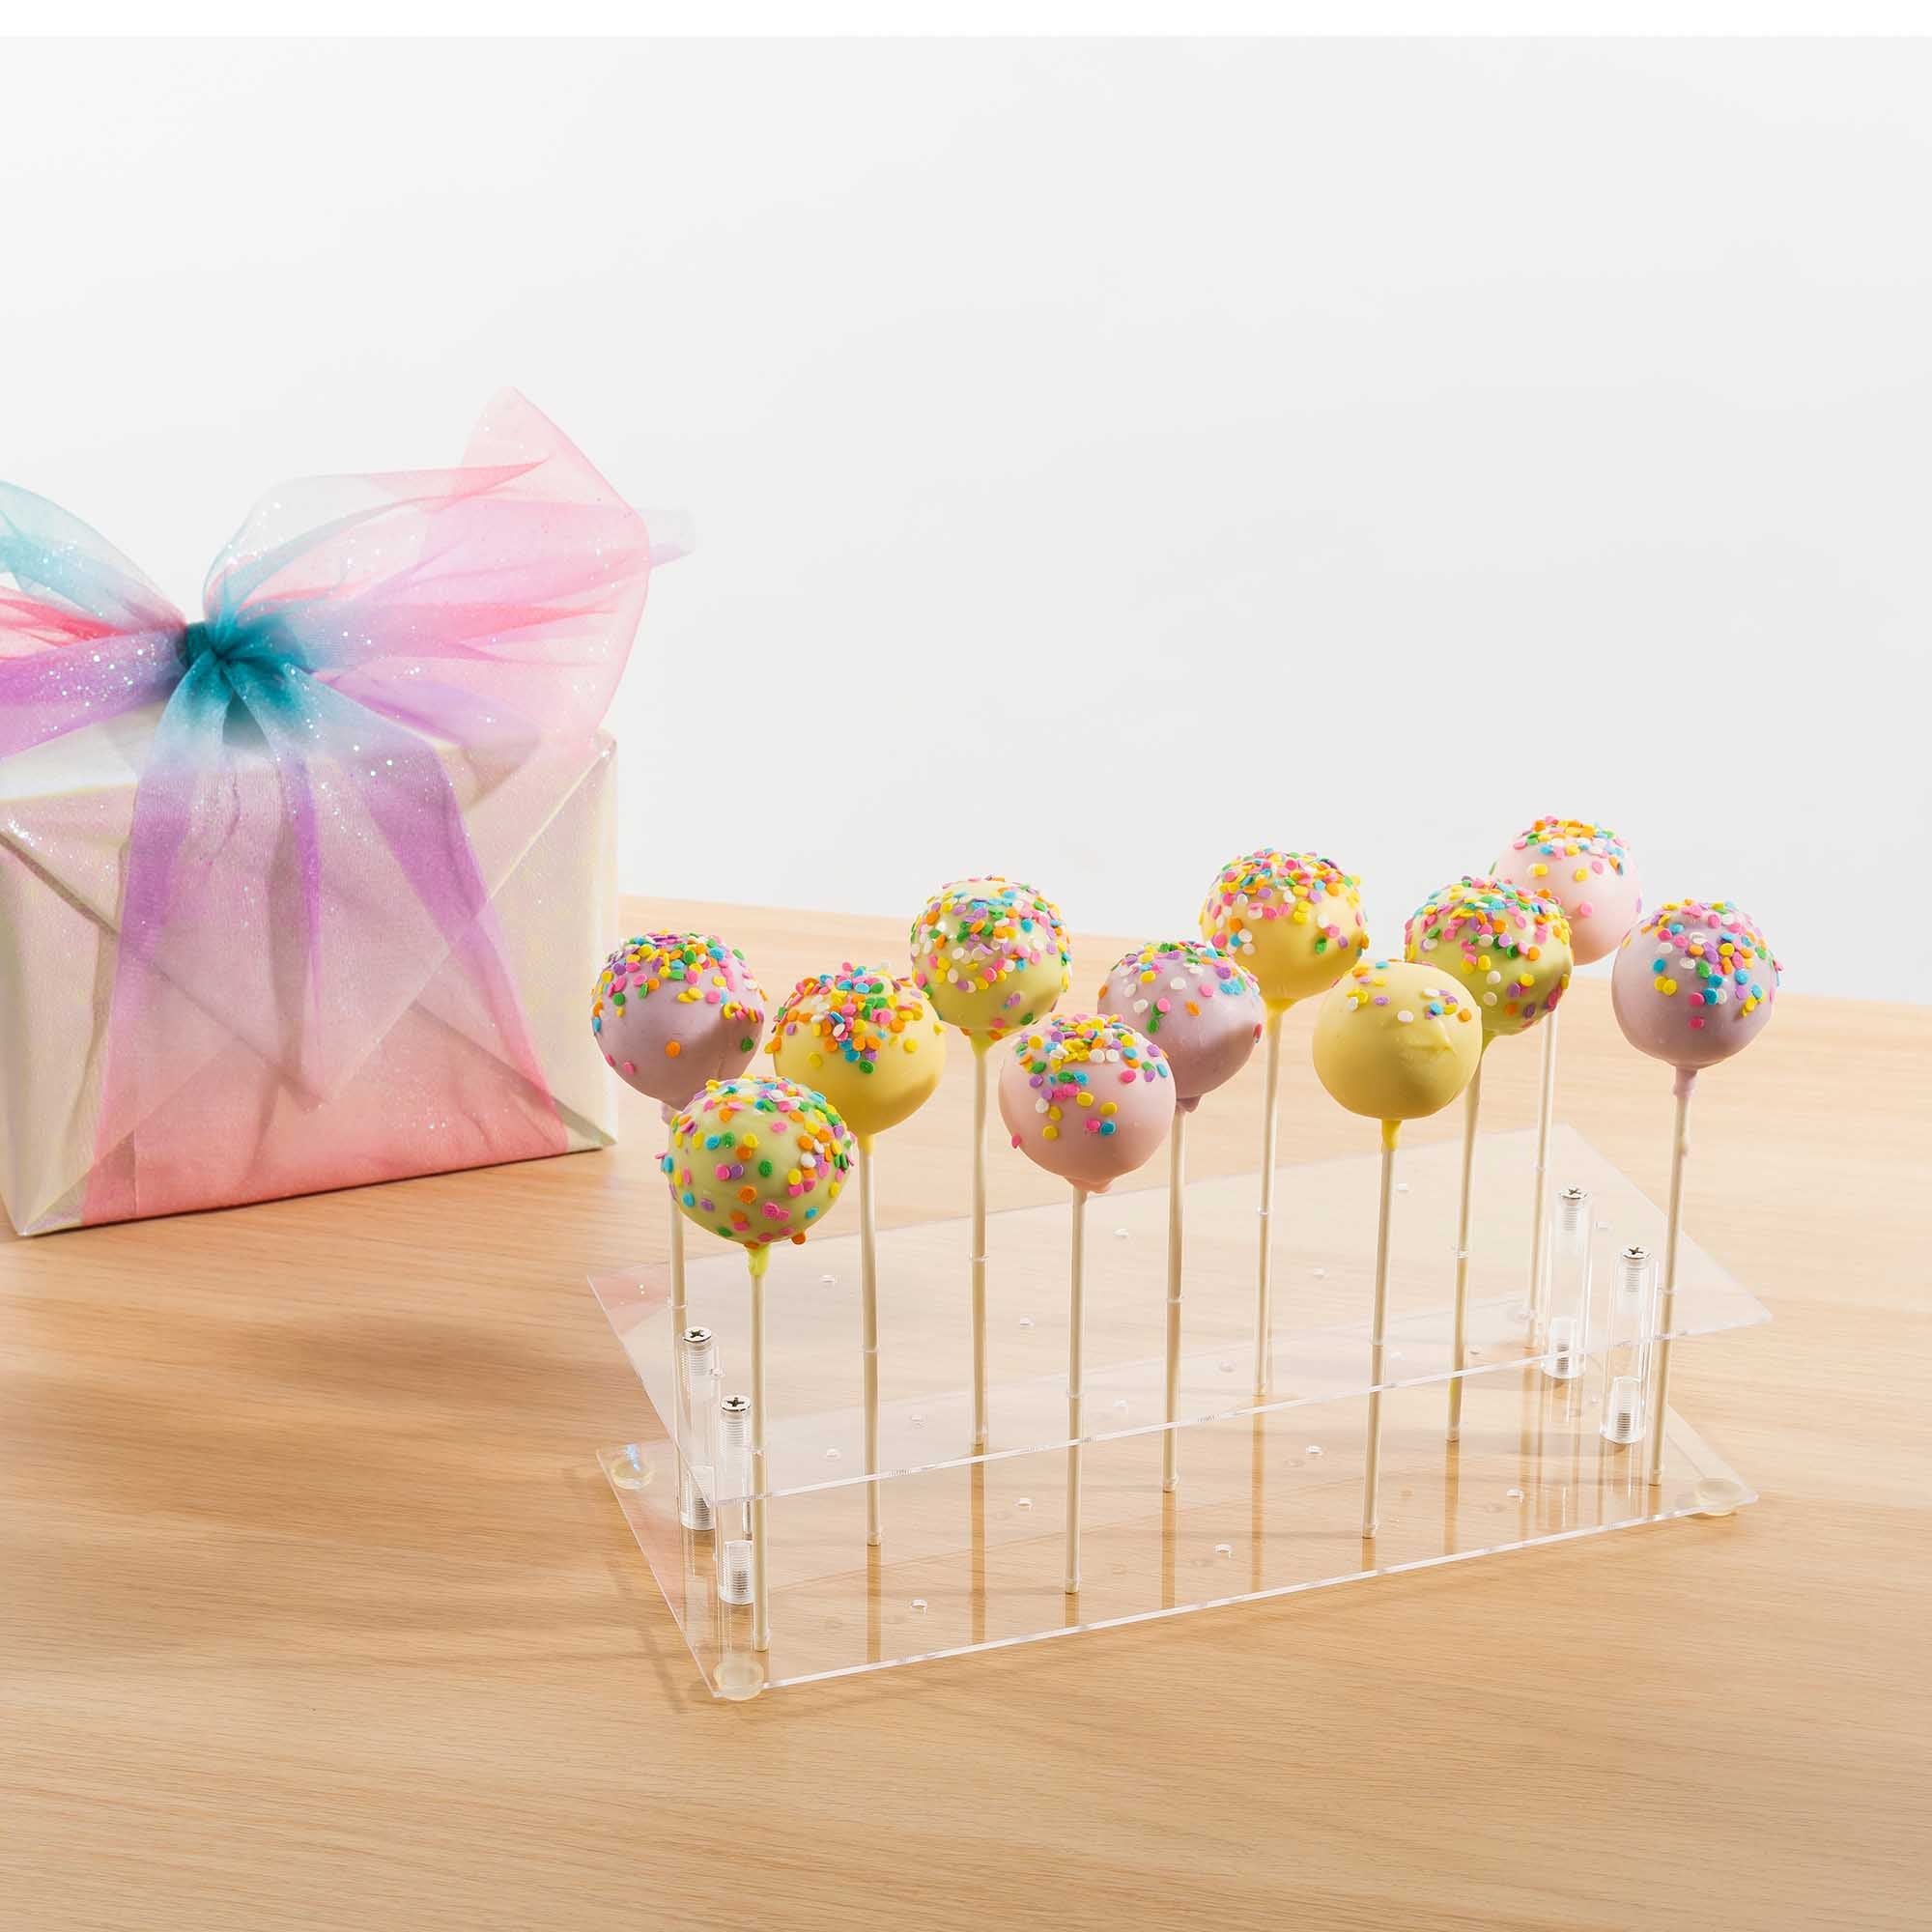 Acrylic Cake Pop Stand | Holds Up to 12 Skewers